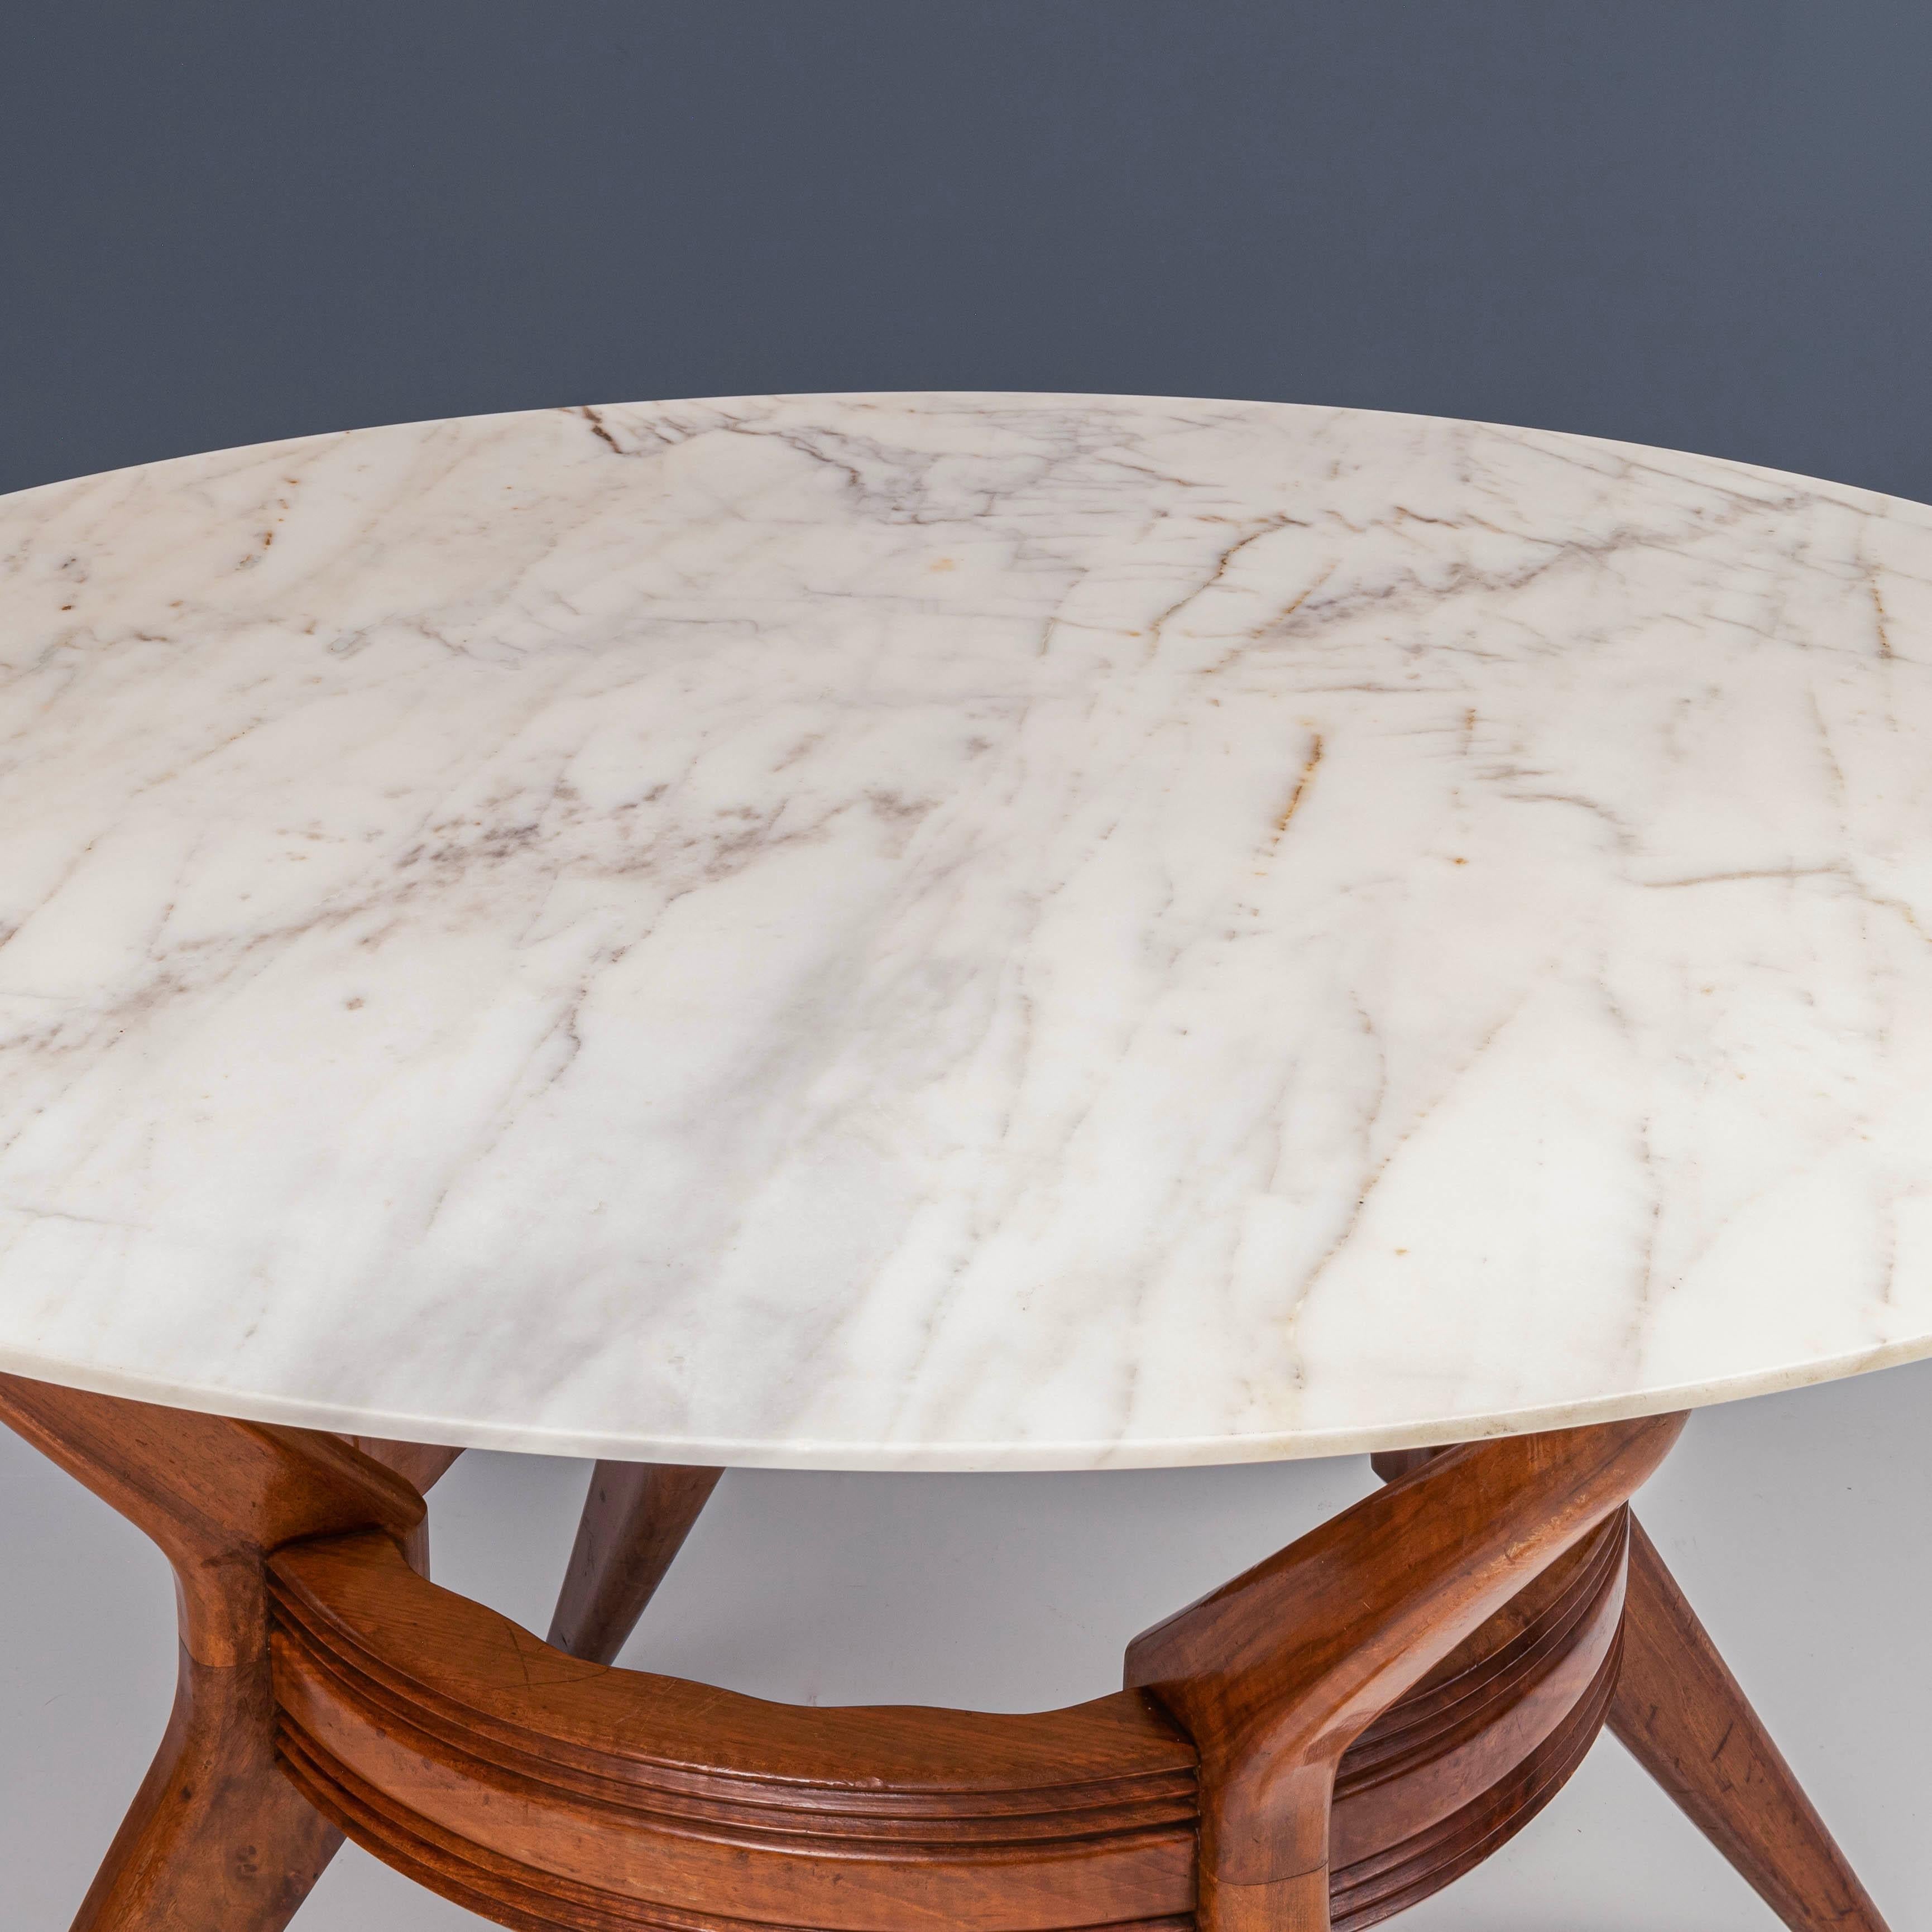 Mid-20th Century Round Dining Table by Ariberto Colombo in Marble and Wood, Italy, 1950s For Sale